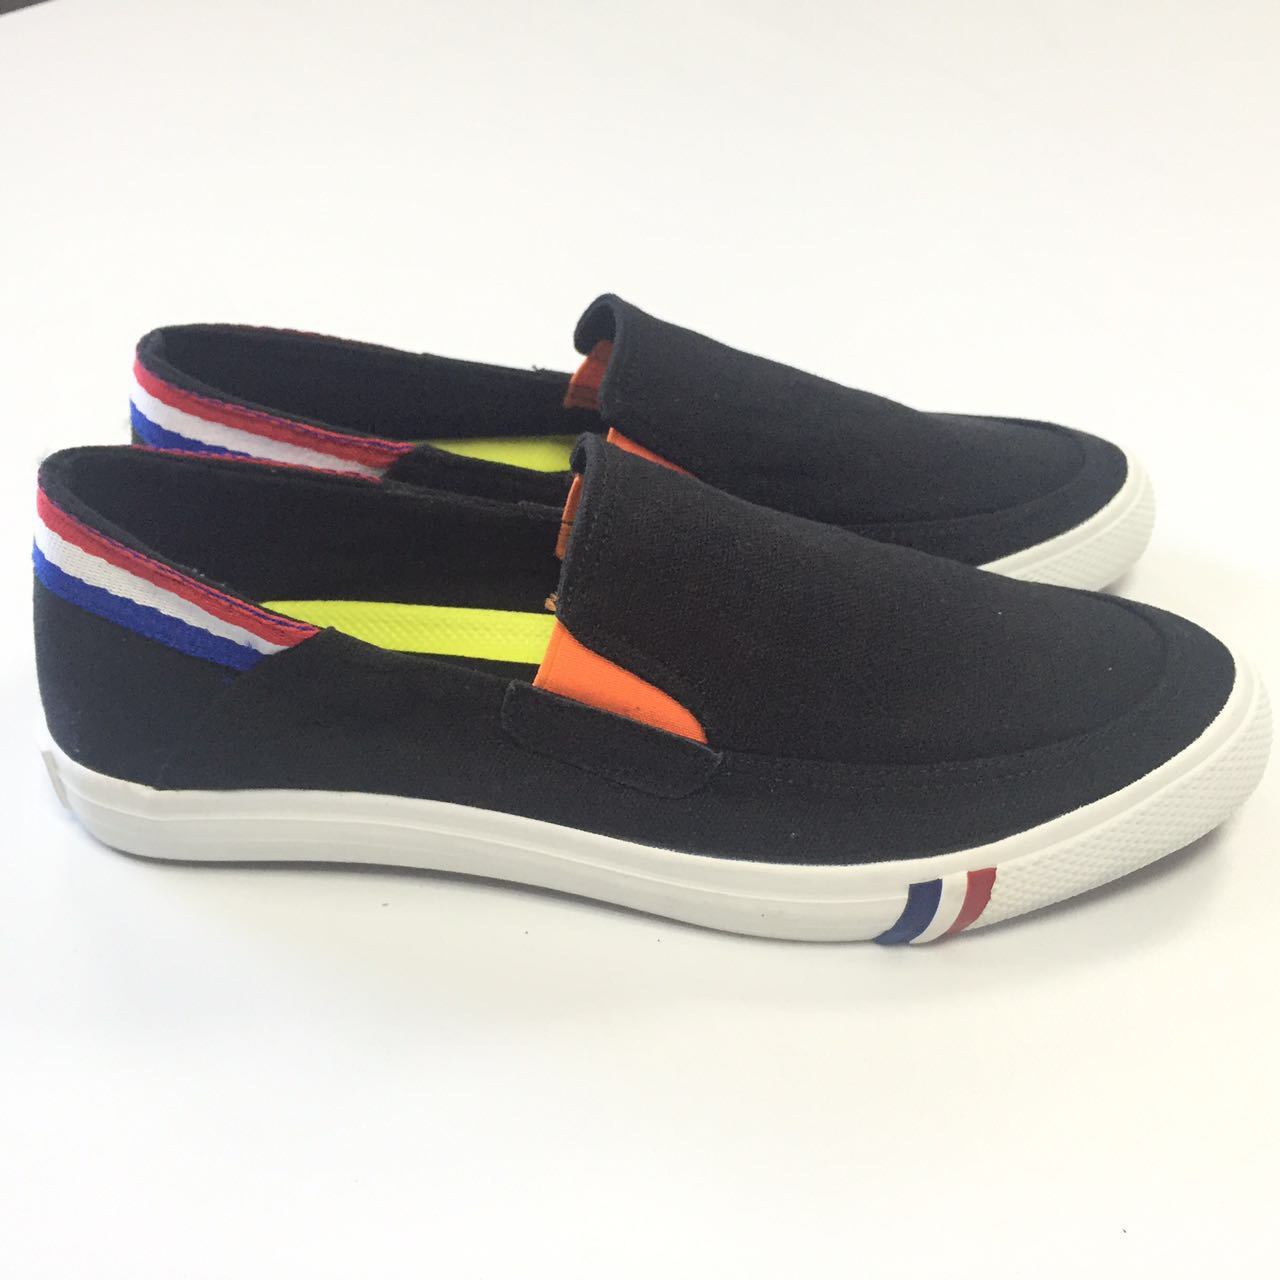 New Design Casual and Comfortable Canvas Shoes No Shoelaces